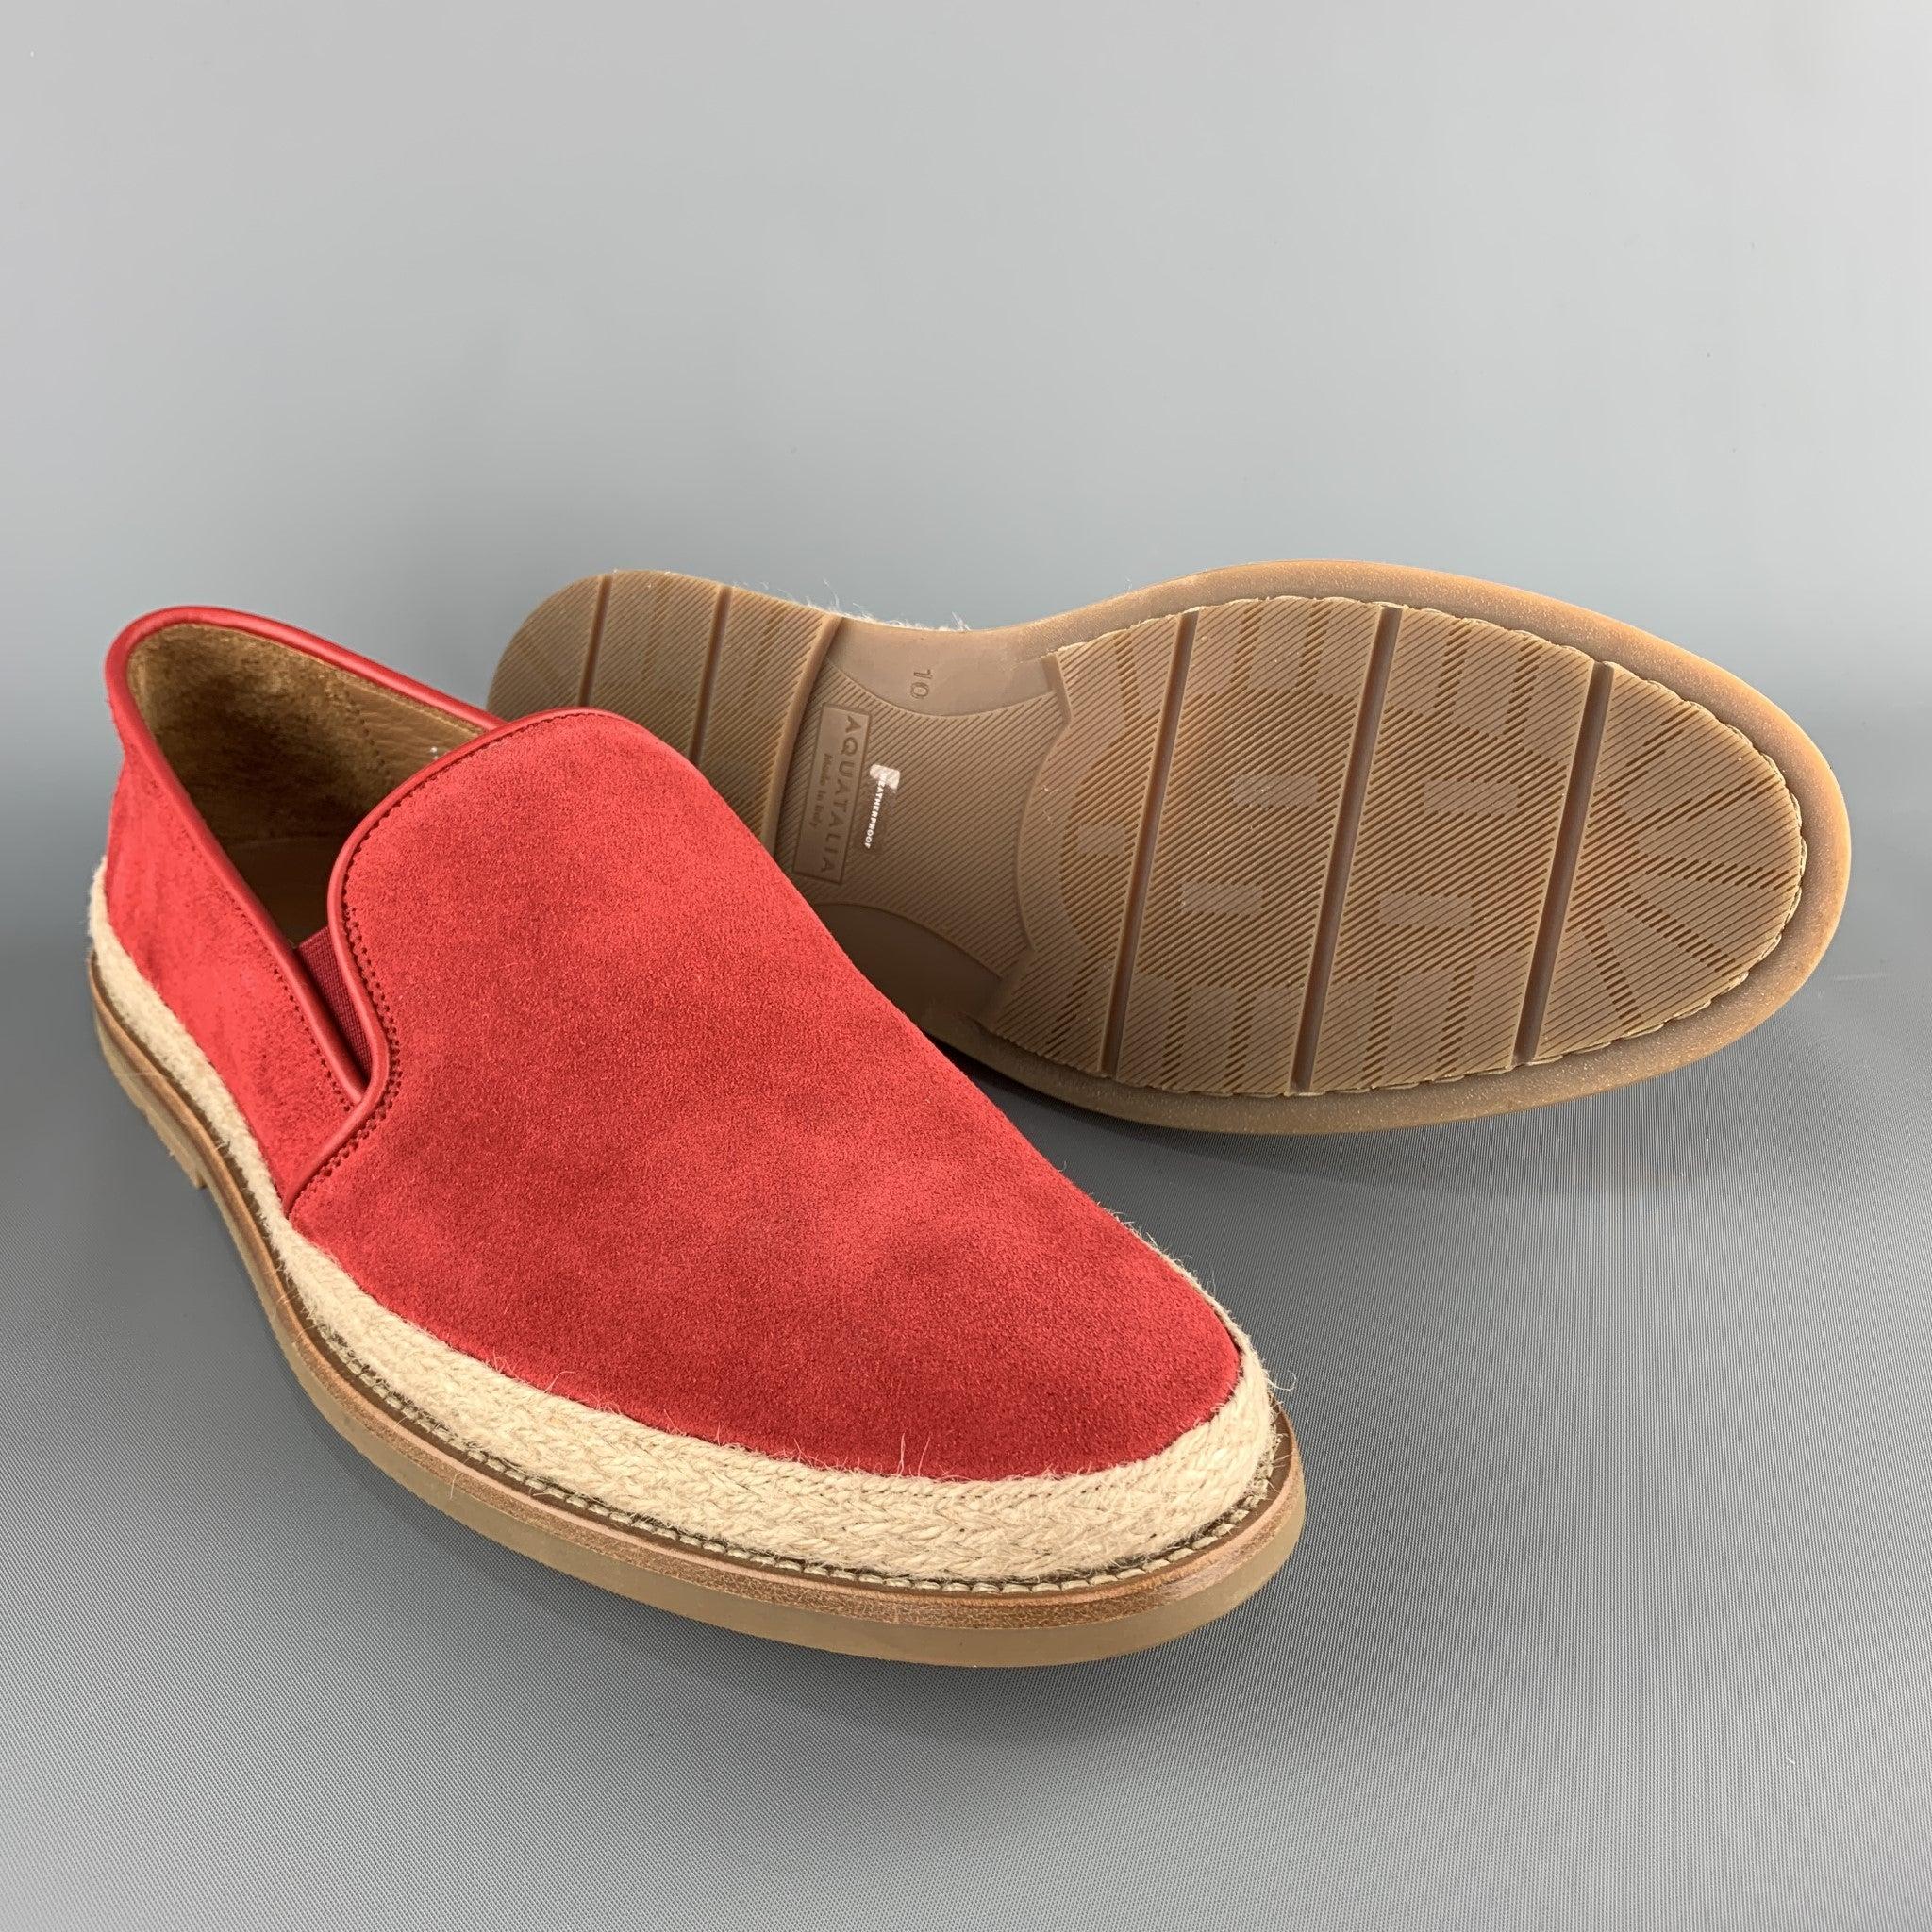 AQUATALIA Size 11 Red Suede Braided Trim Rubber Sole Loafers In Good Condition For Sale In San Francisco, CA